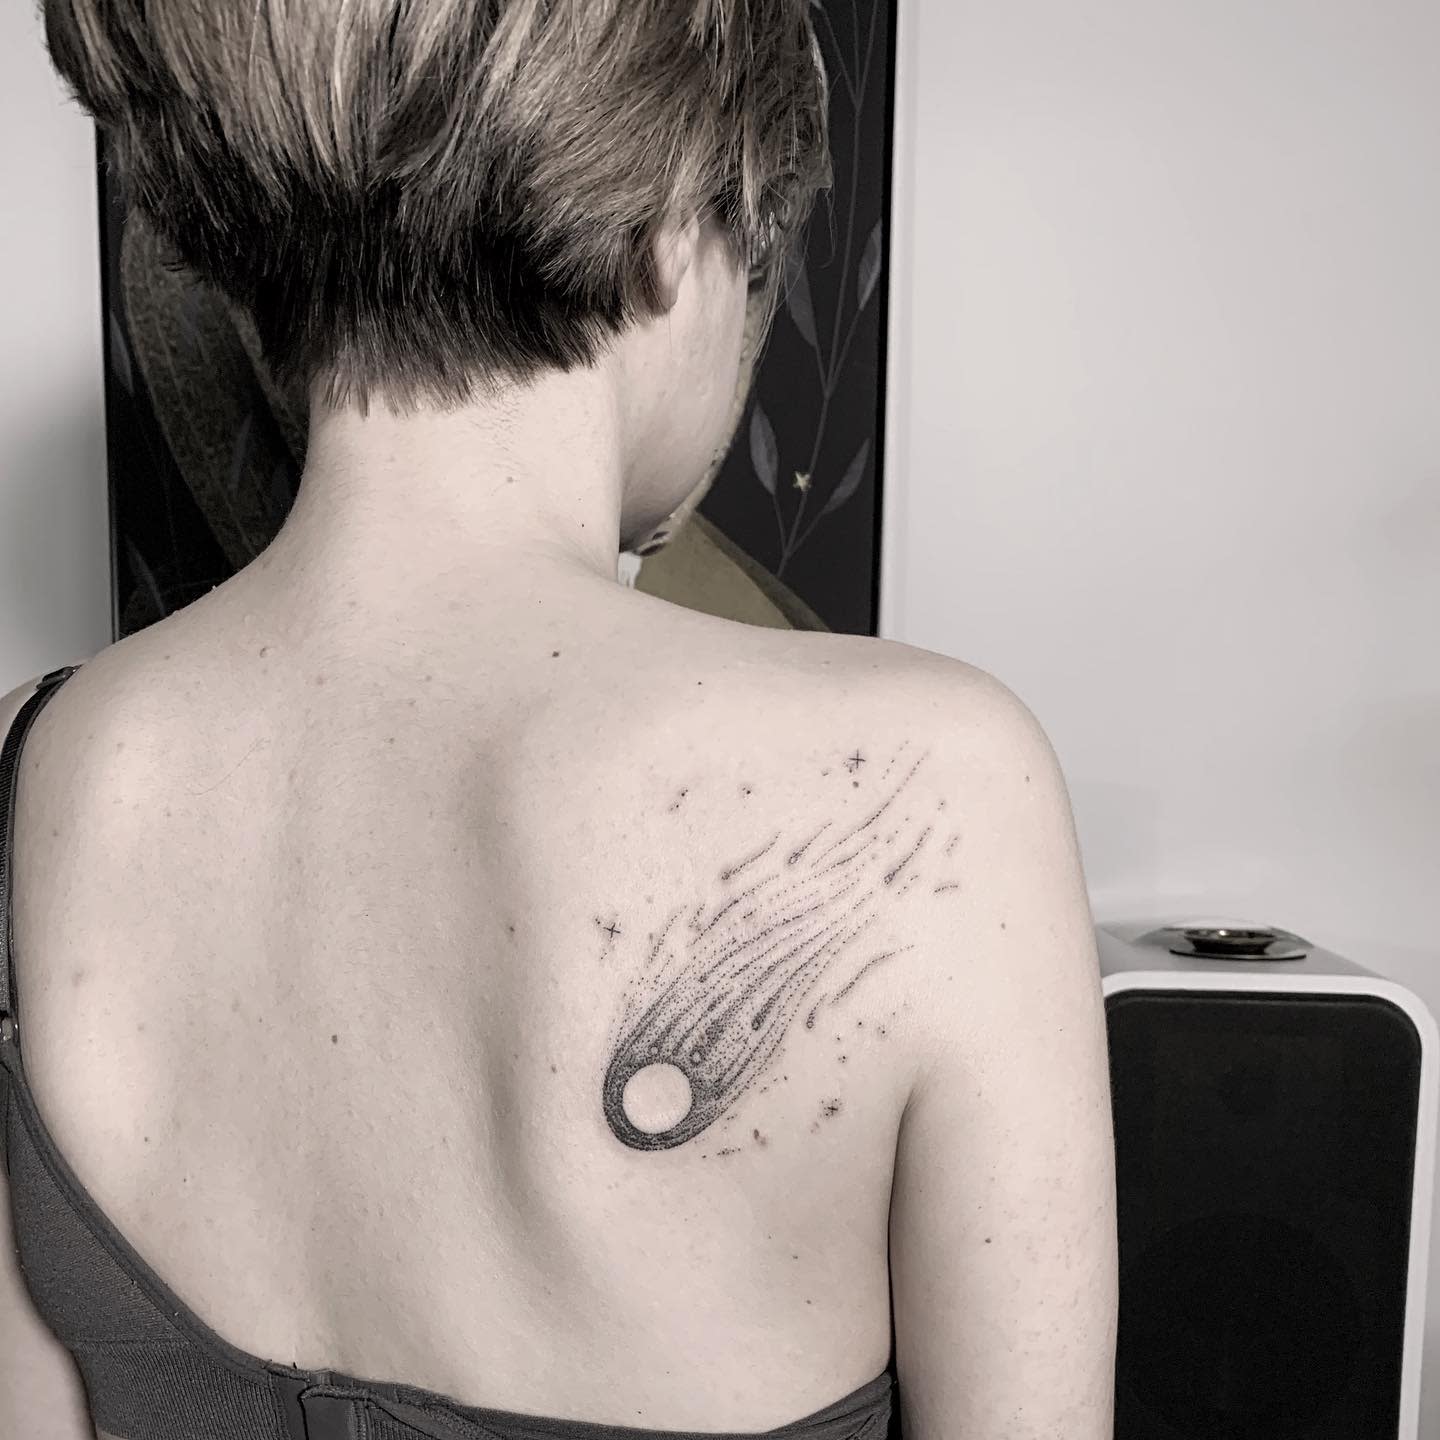 9 Beautiful Shooting Star Tattoo Designs and Ideas